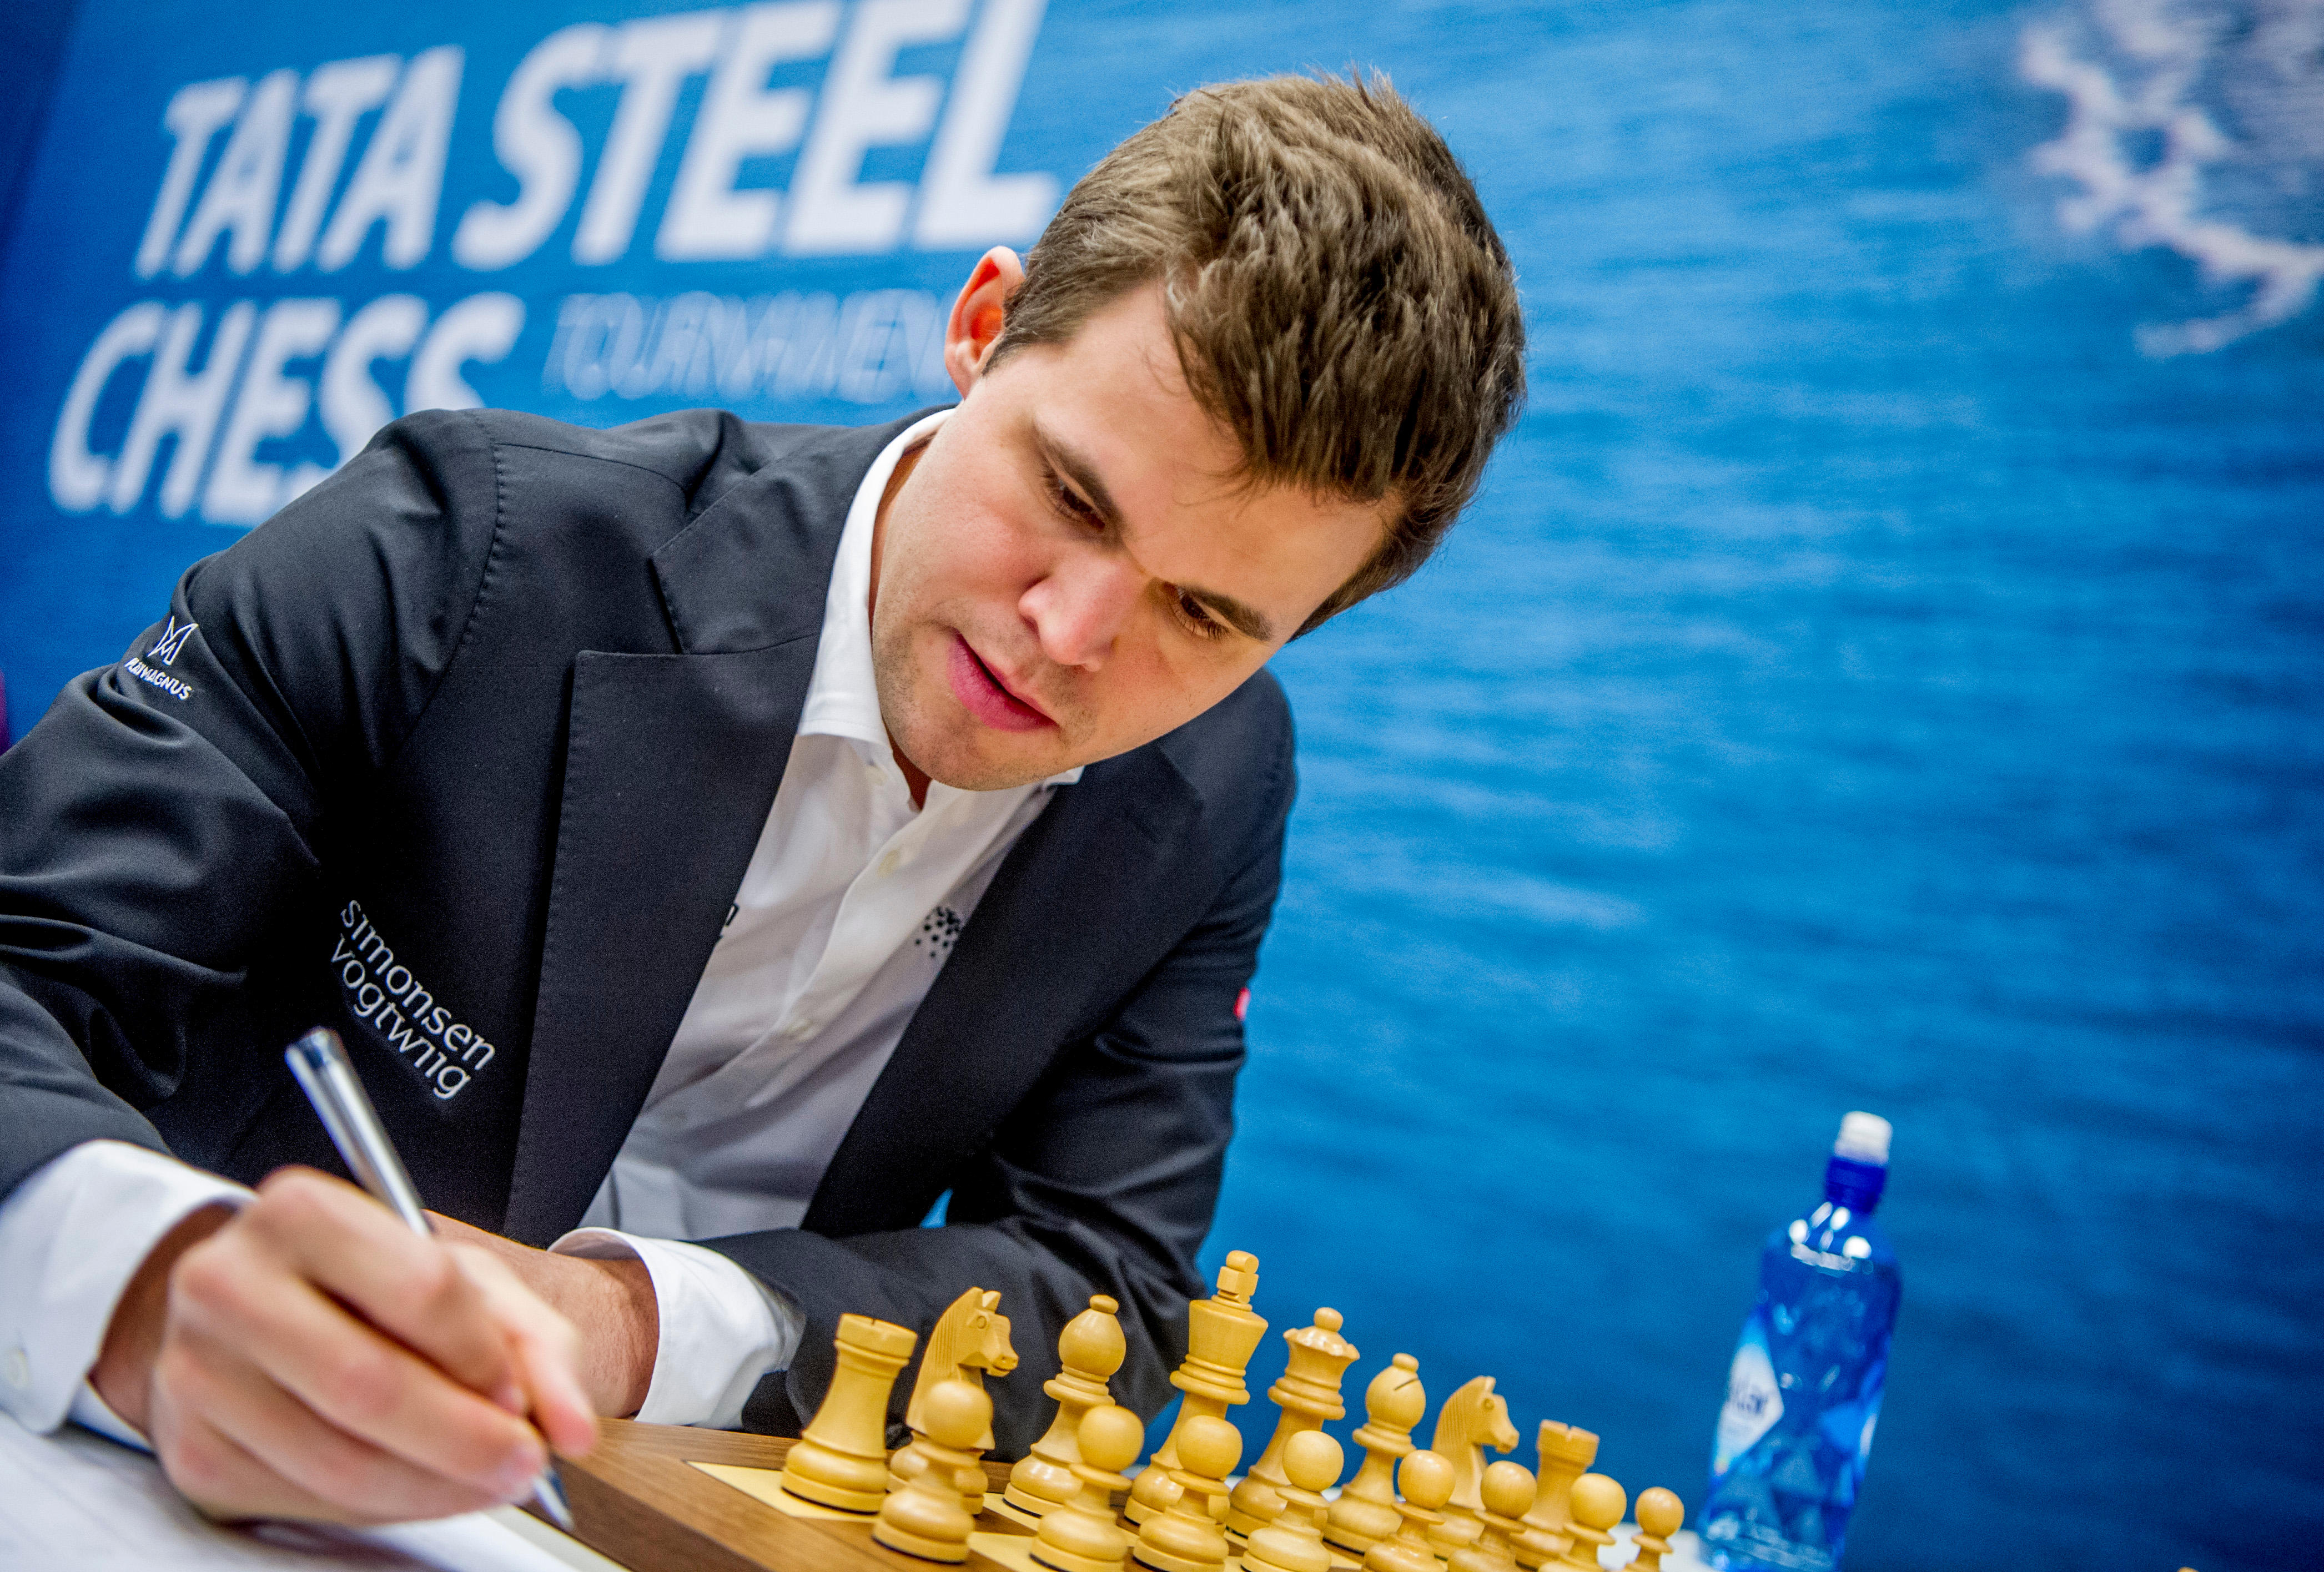 Investigation into Hans Niemann has found chess grandmaster 'likely  cheated' more than 100 times